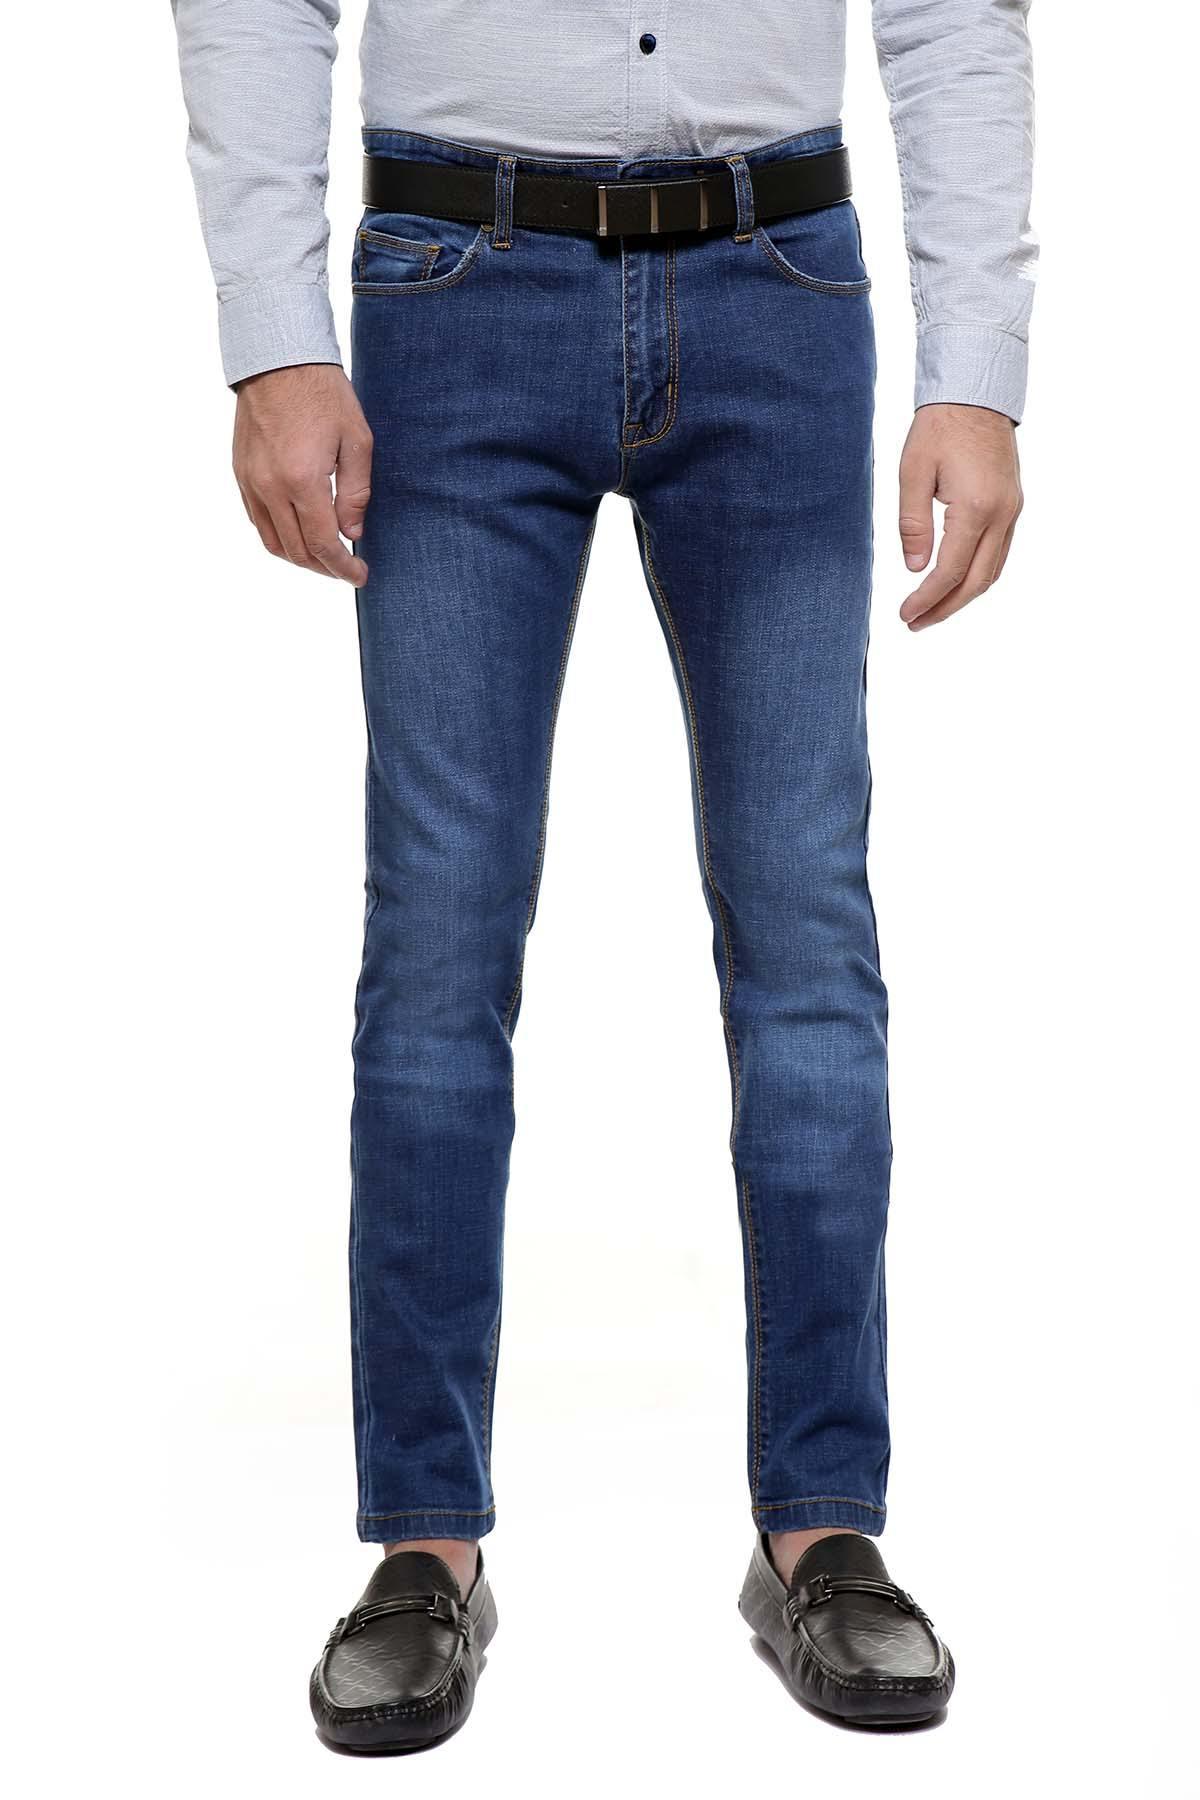 JEAN SKINNY FIT LIGHT BLUE at Charcoal Clothing